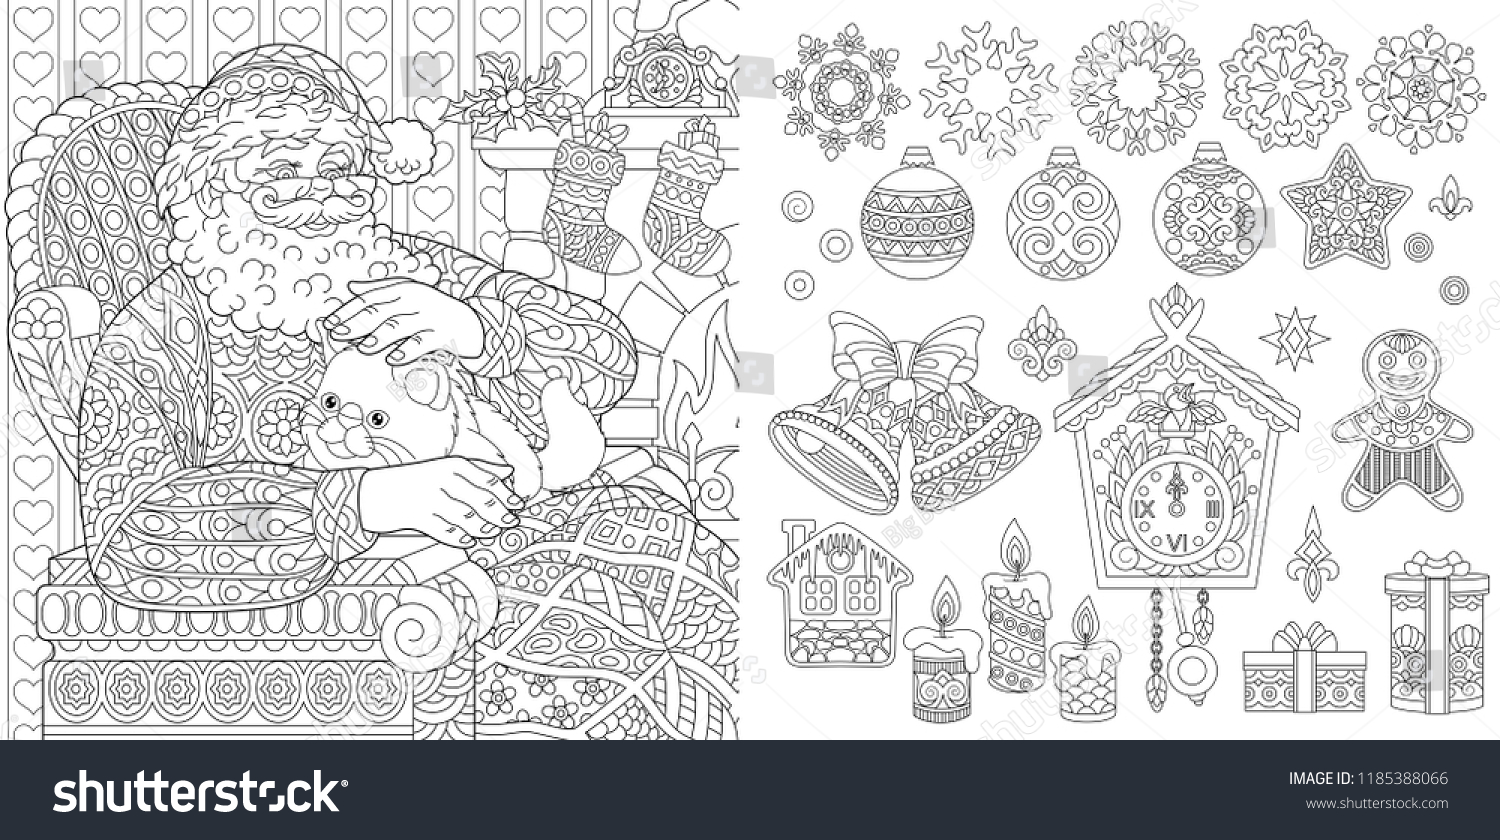 New Year Christmas Coloring Pages Coloring Stock Vector (Royalty Free